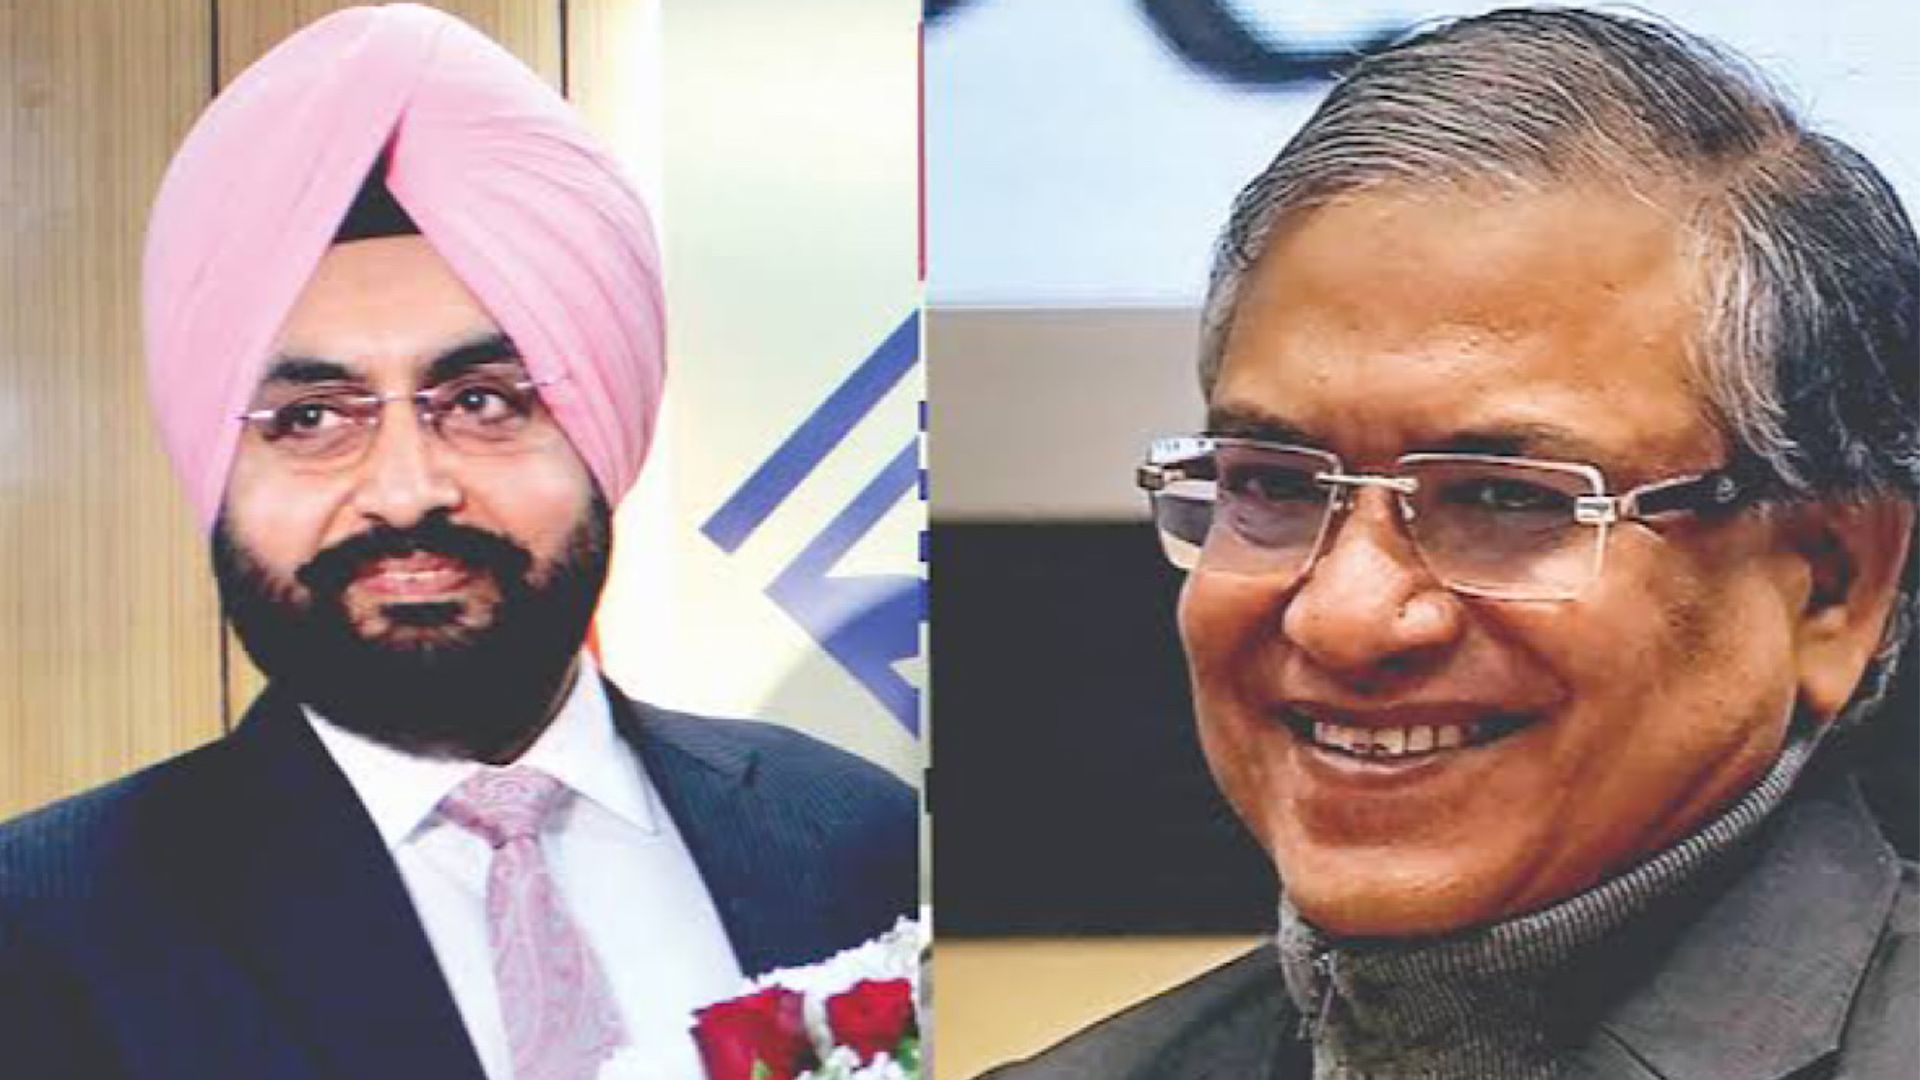 Gyanesh Kumar and Sukhbir Singh Sandhu Assume Roles as Election Commissioners Today